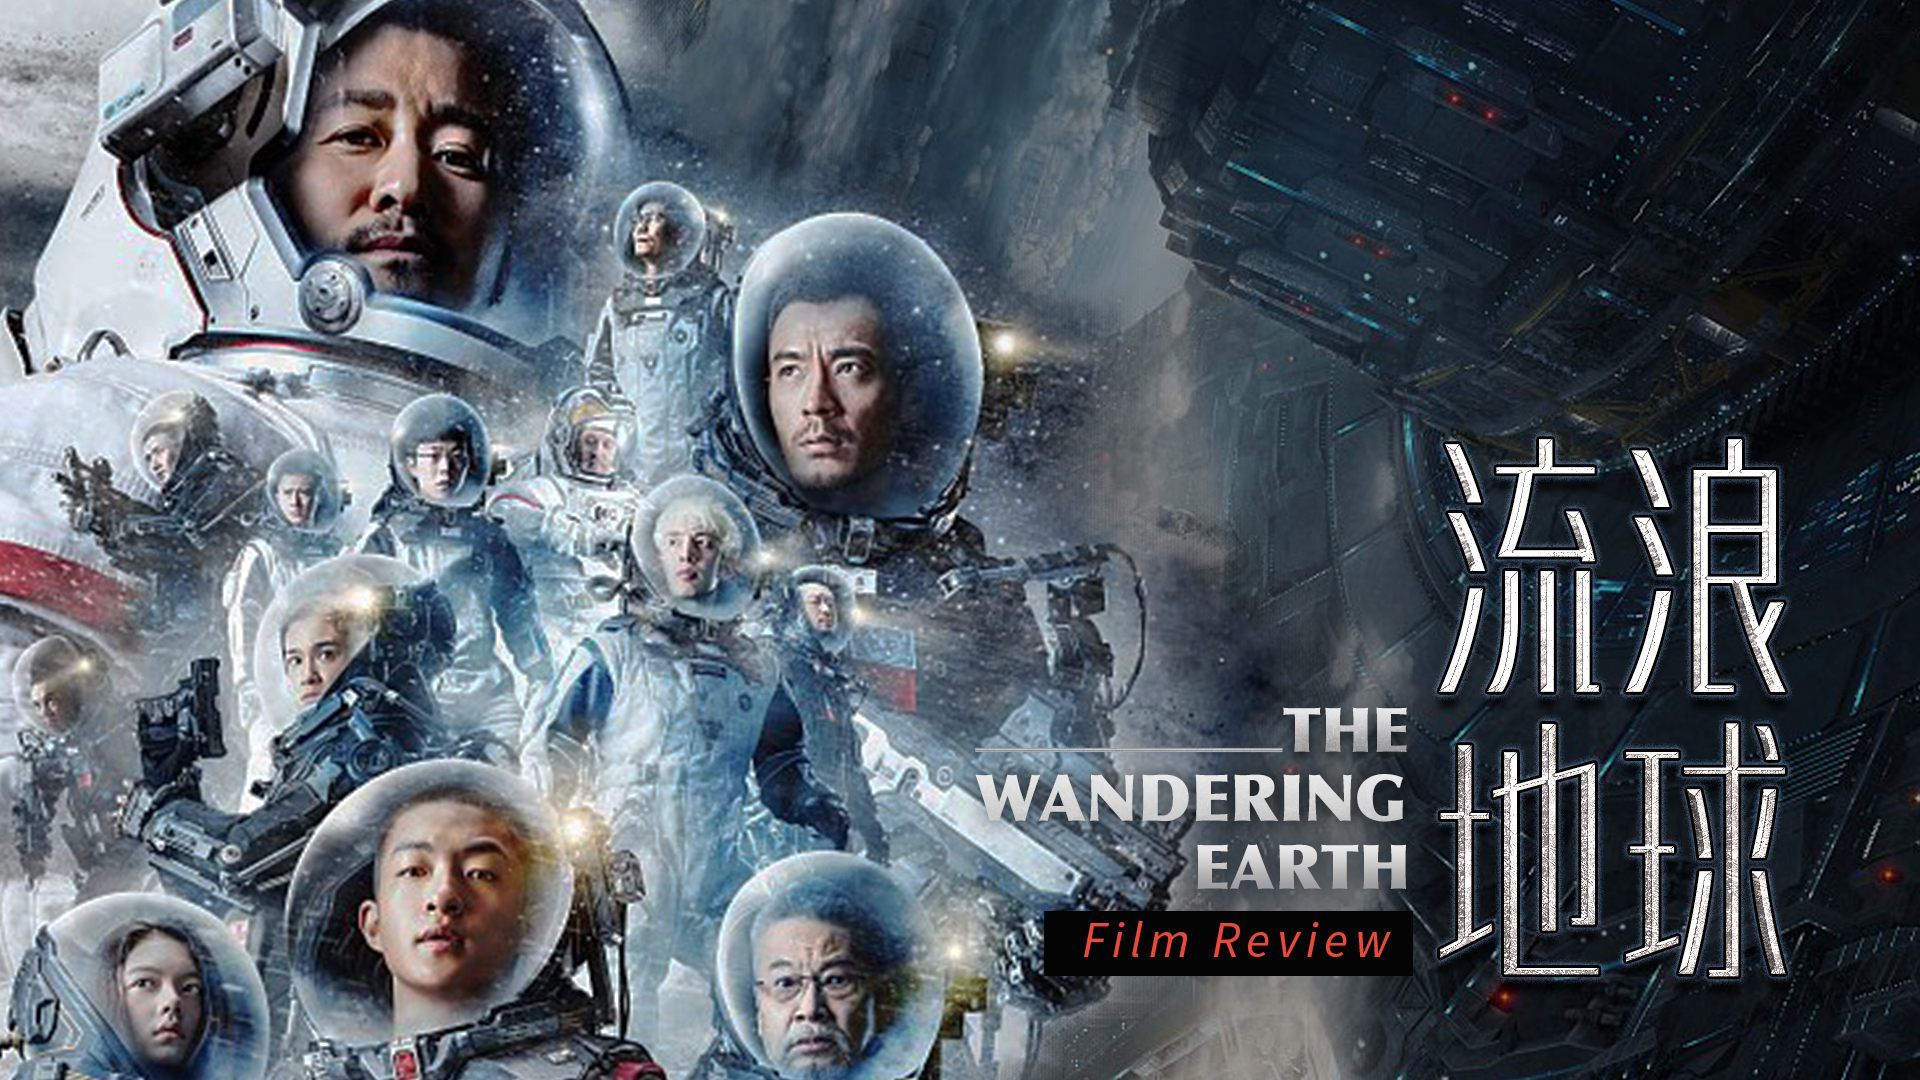 The Wandering Earth': A Chinese plan for doomsday escape